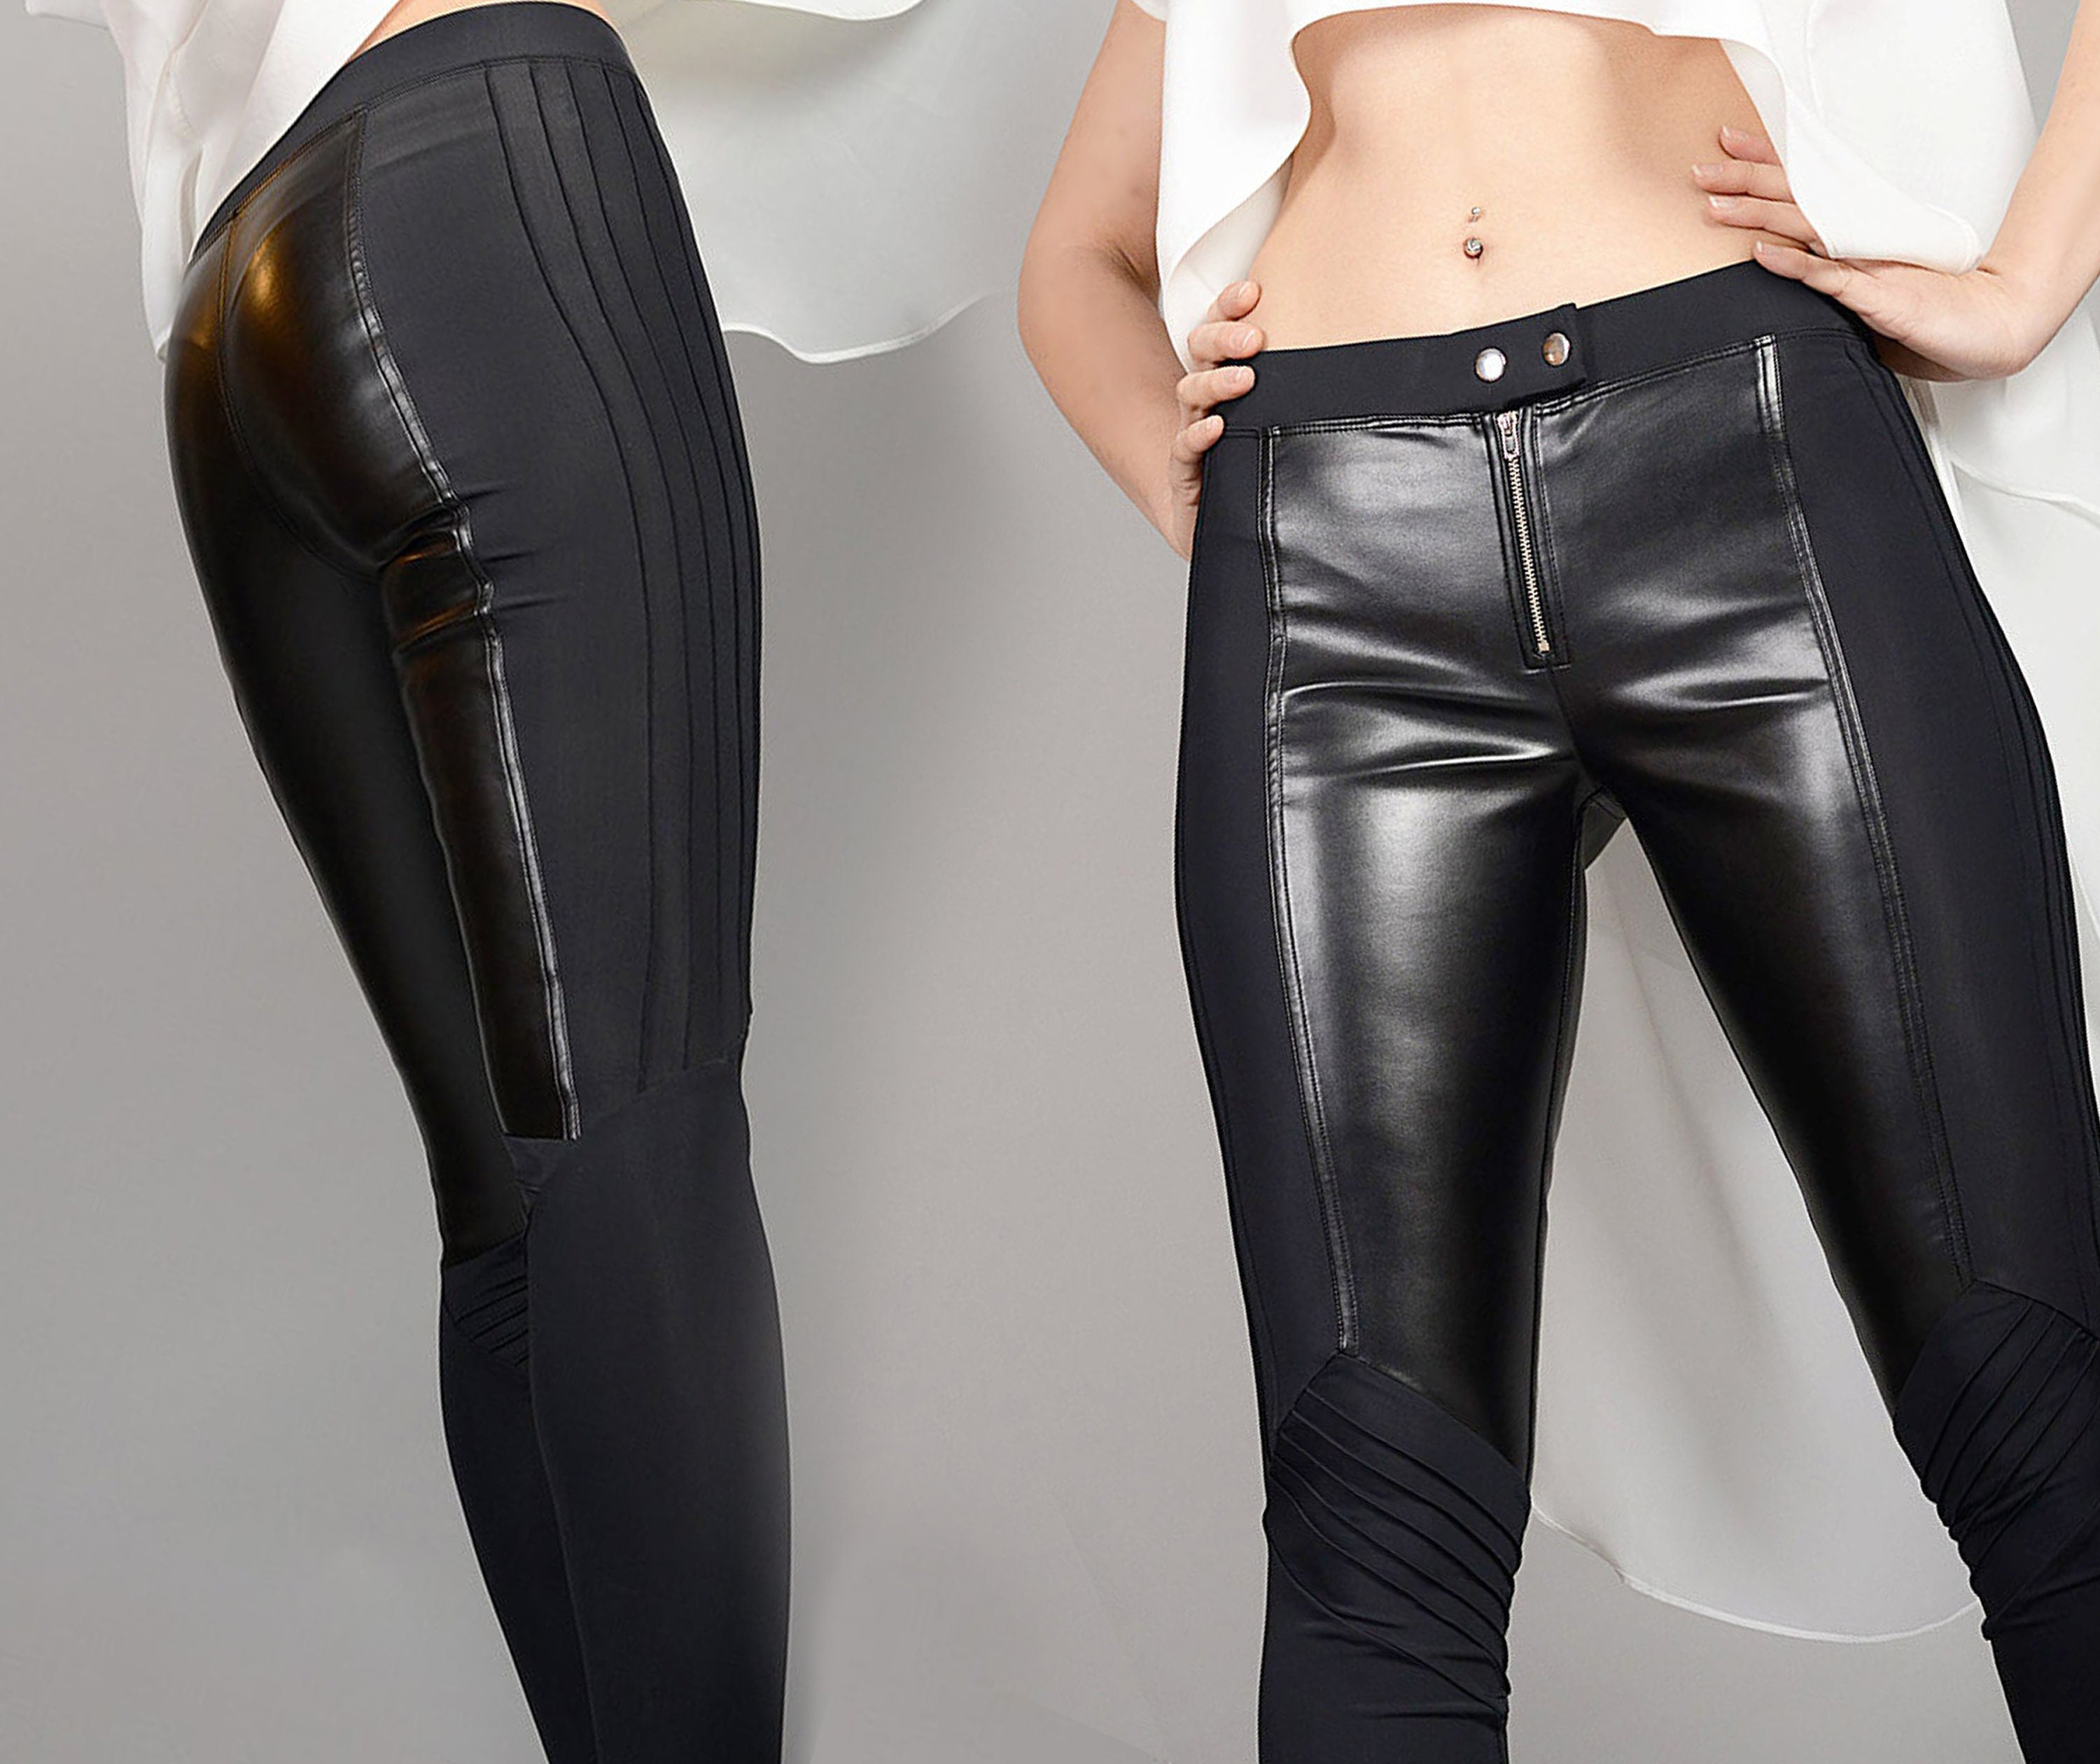 Women Black Leather Pants/ High Waisted Leather Leggings for Women